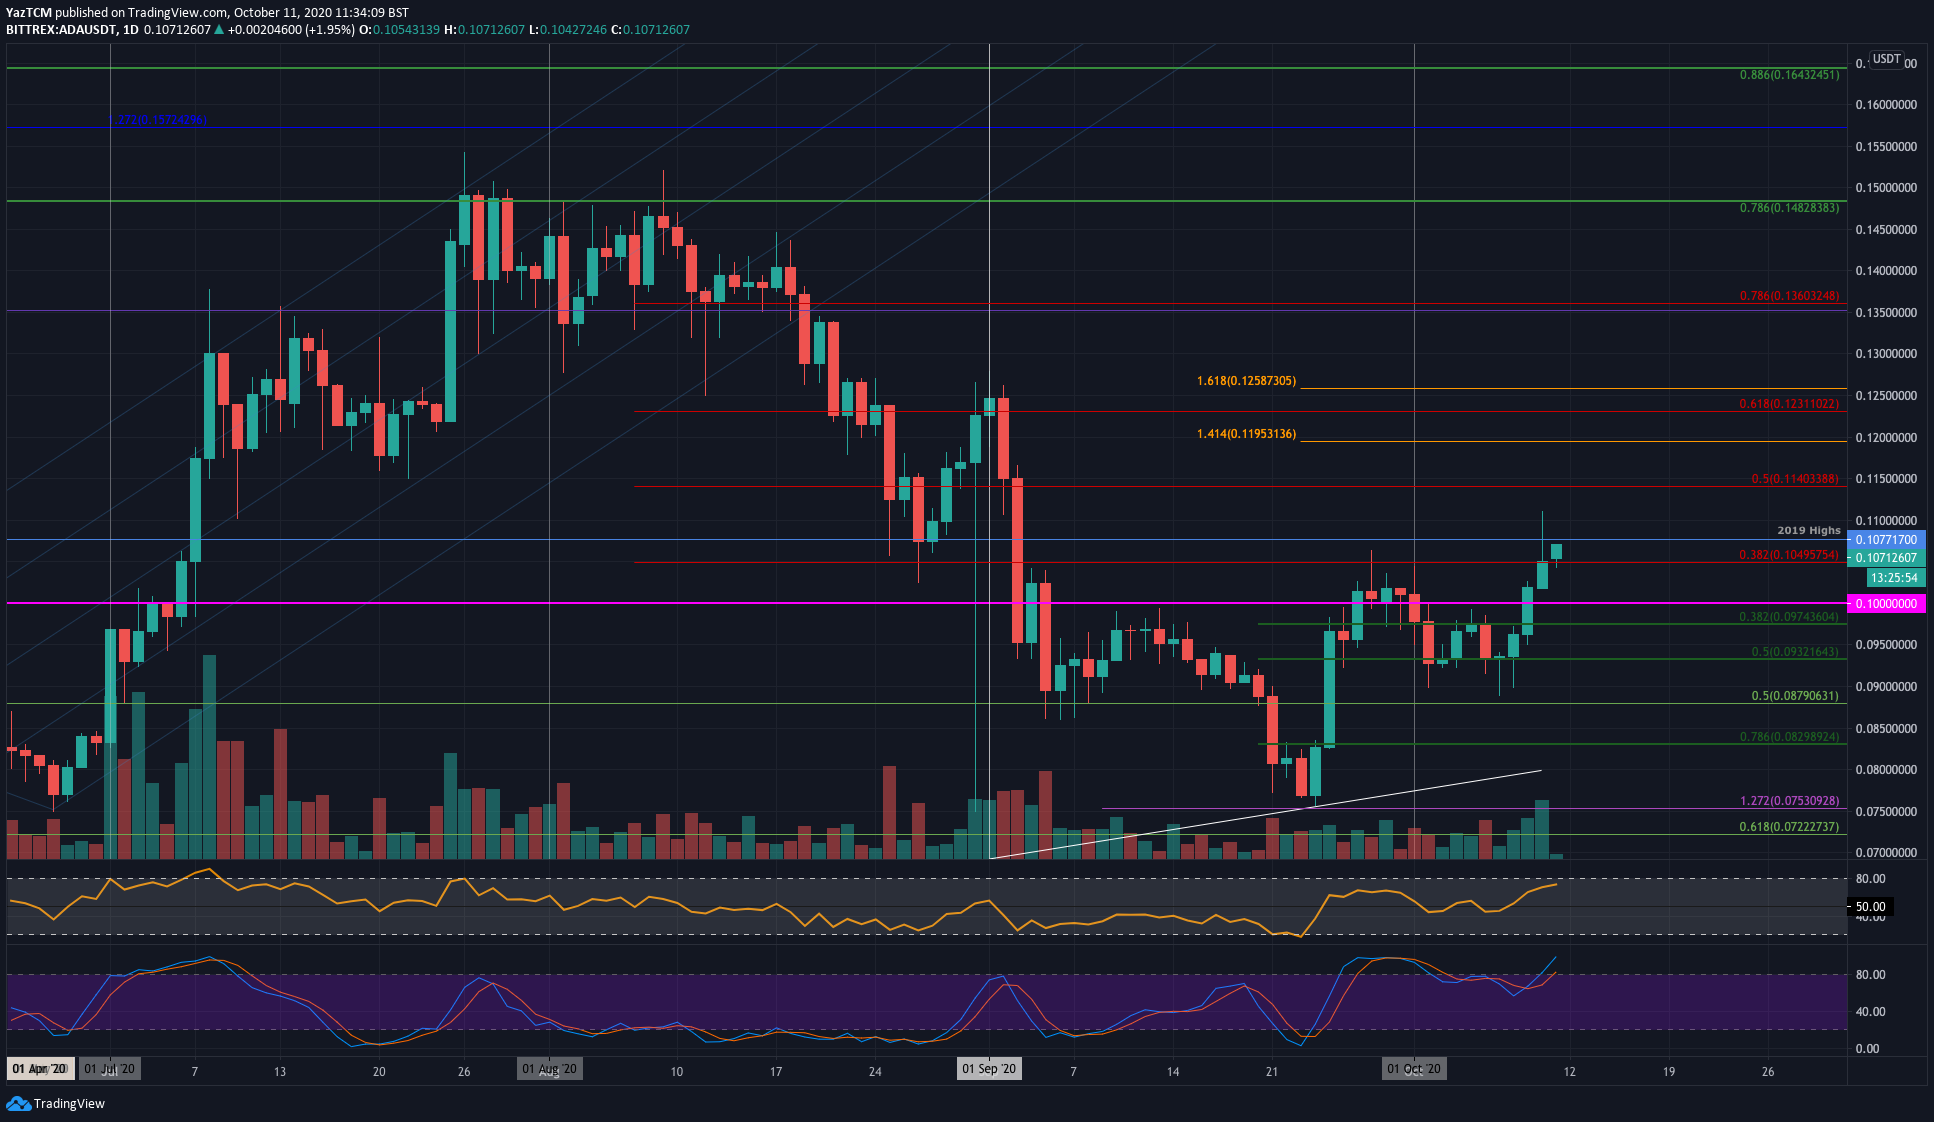 Cardano Price Analysis: ADA Soars 15% Over The Past Week – Will Bulls Continue Higher?